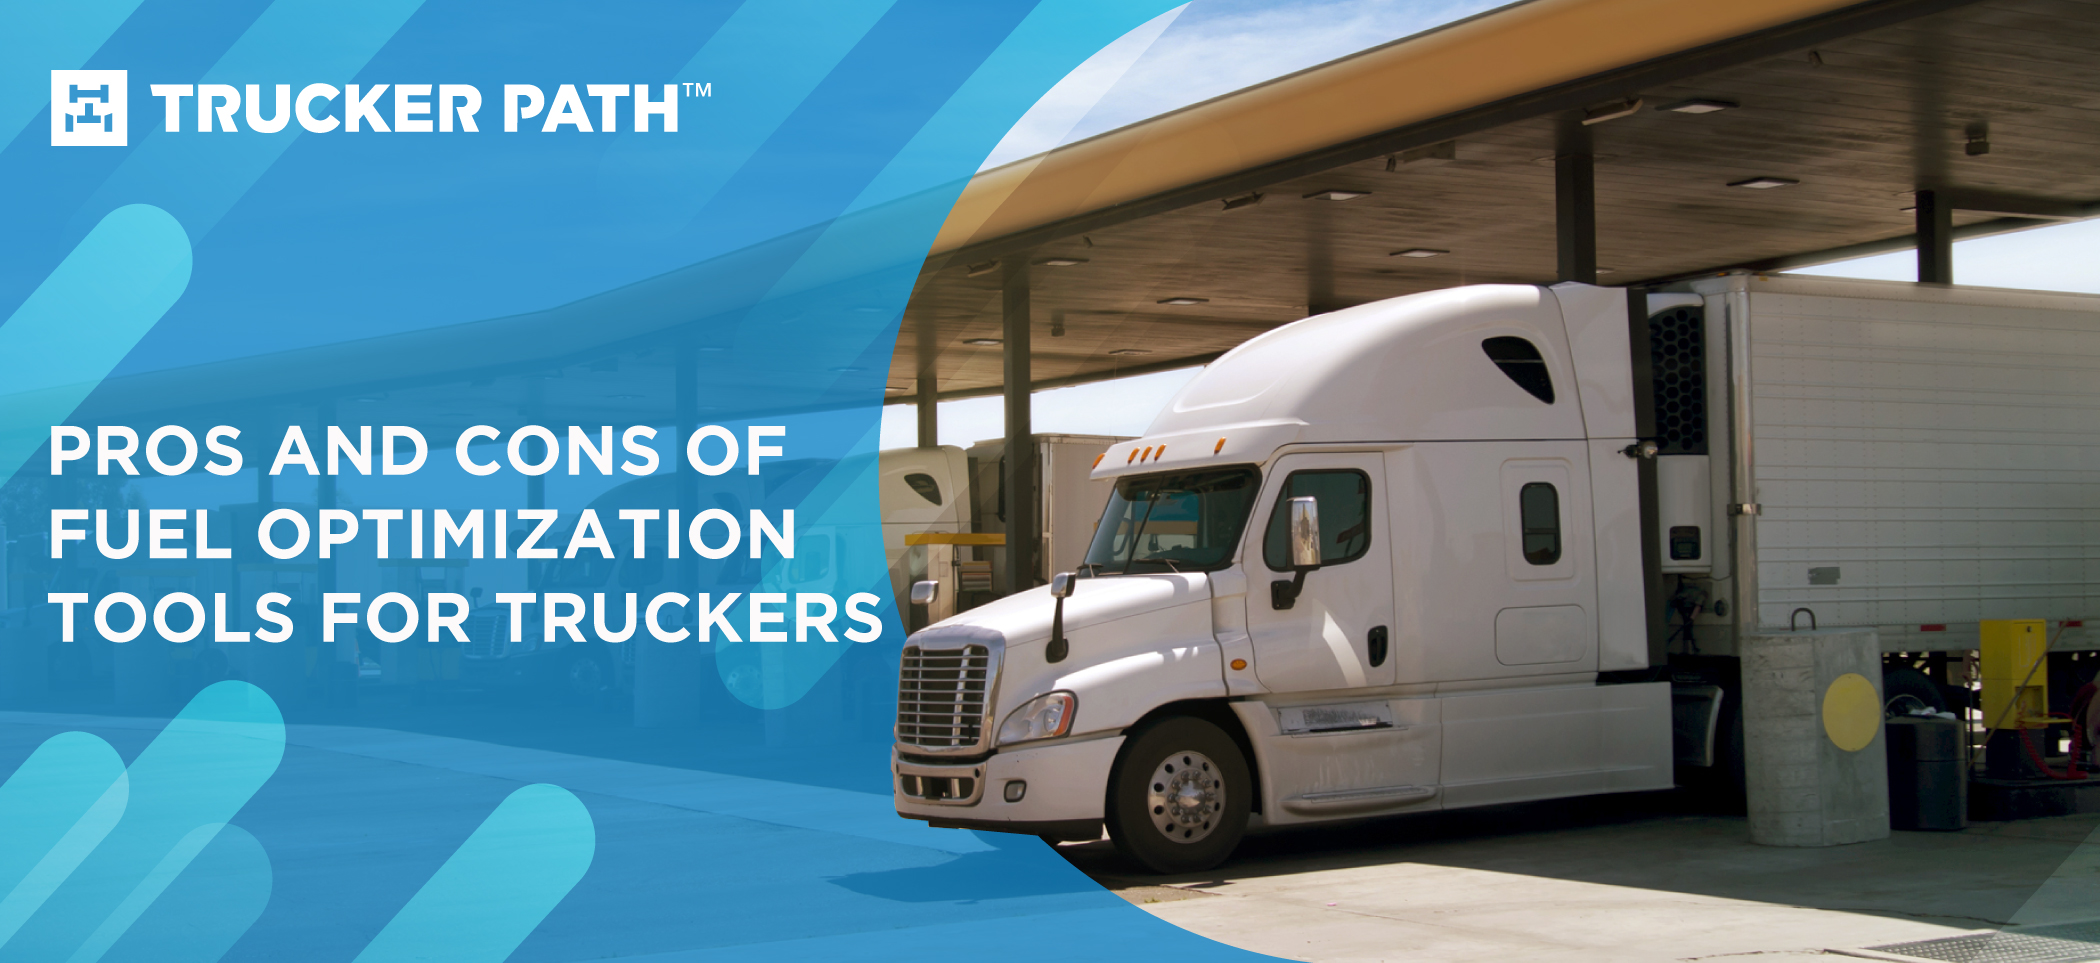 The Pros and Cons of Fuel Optimization Tools for Trucking